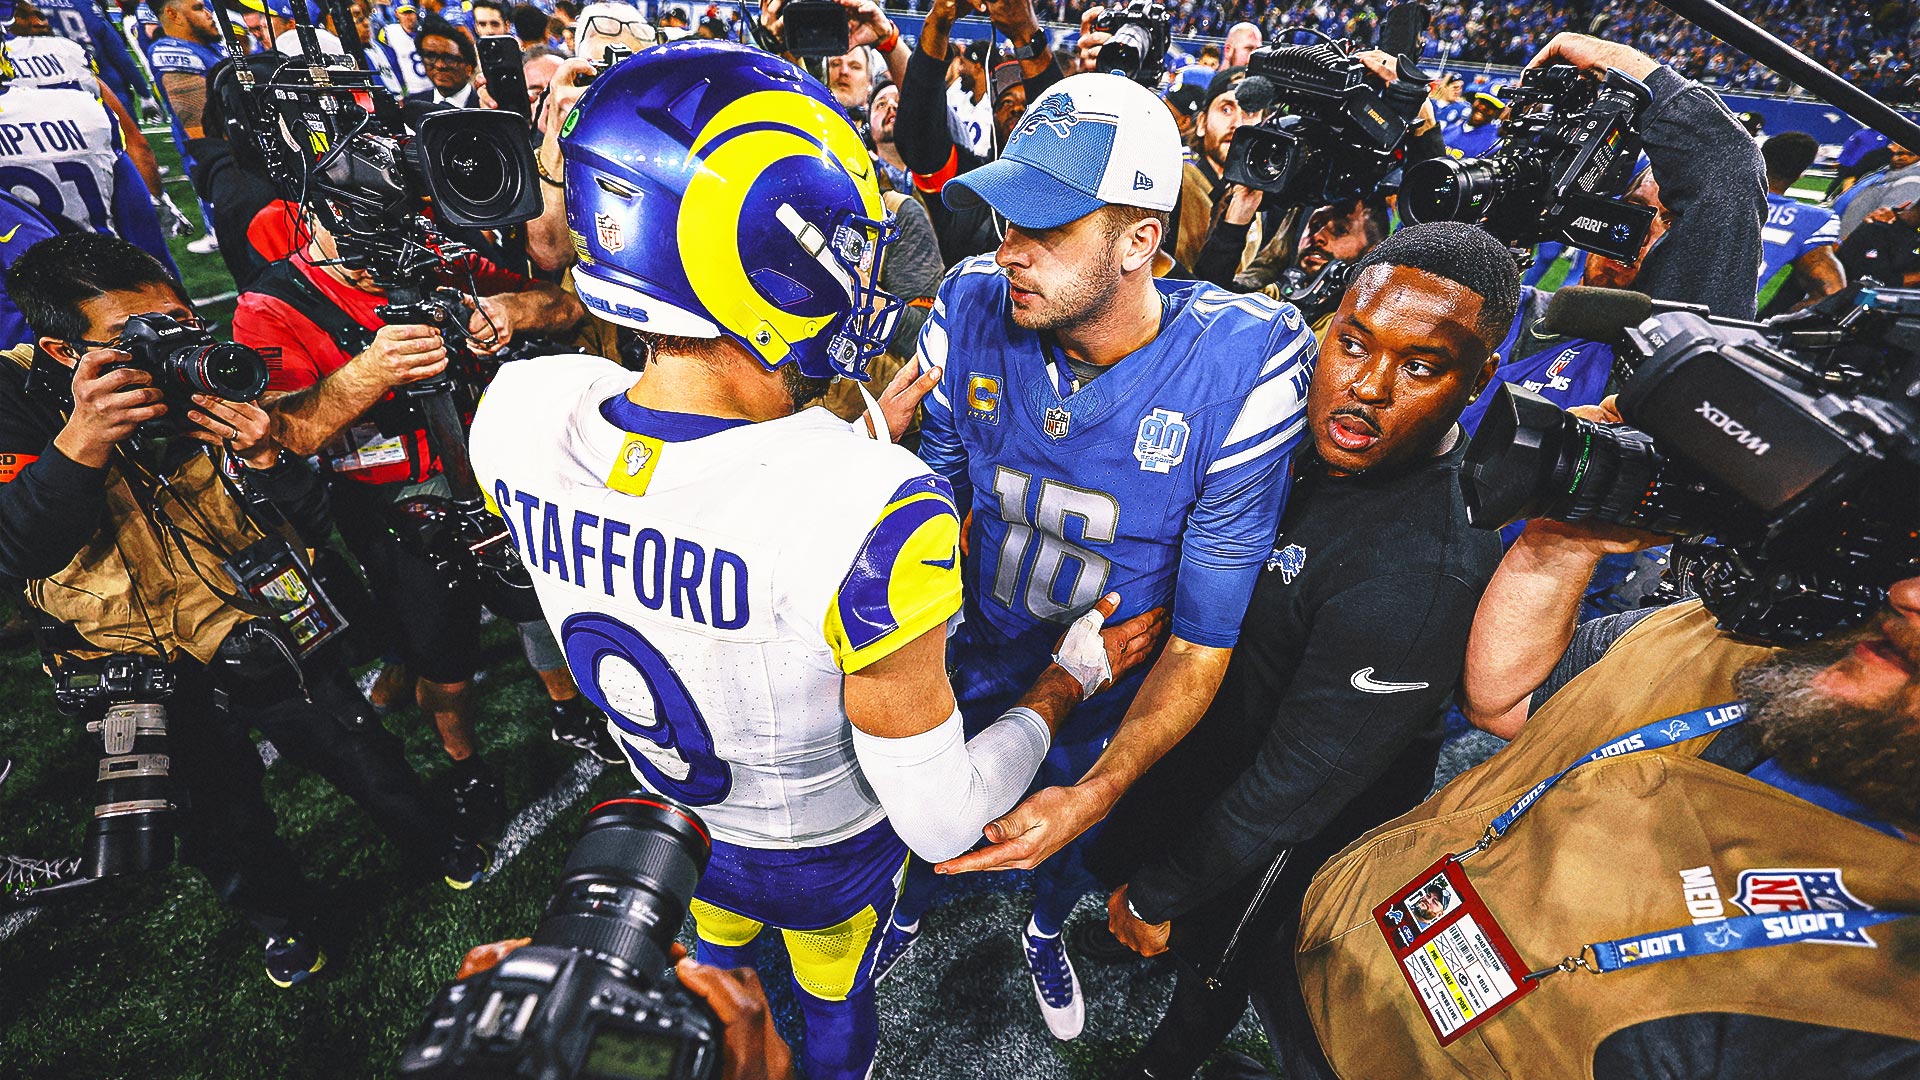 Jared Goff earns revenge over Rams; Lions grab first playoff win in 32 years